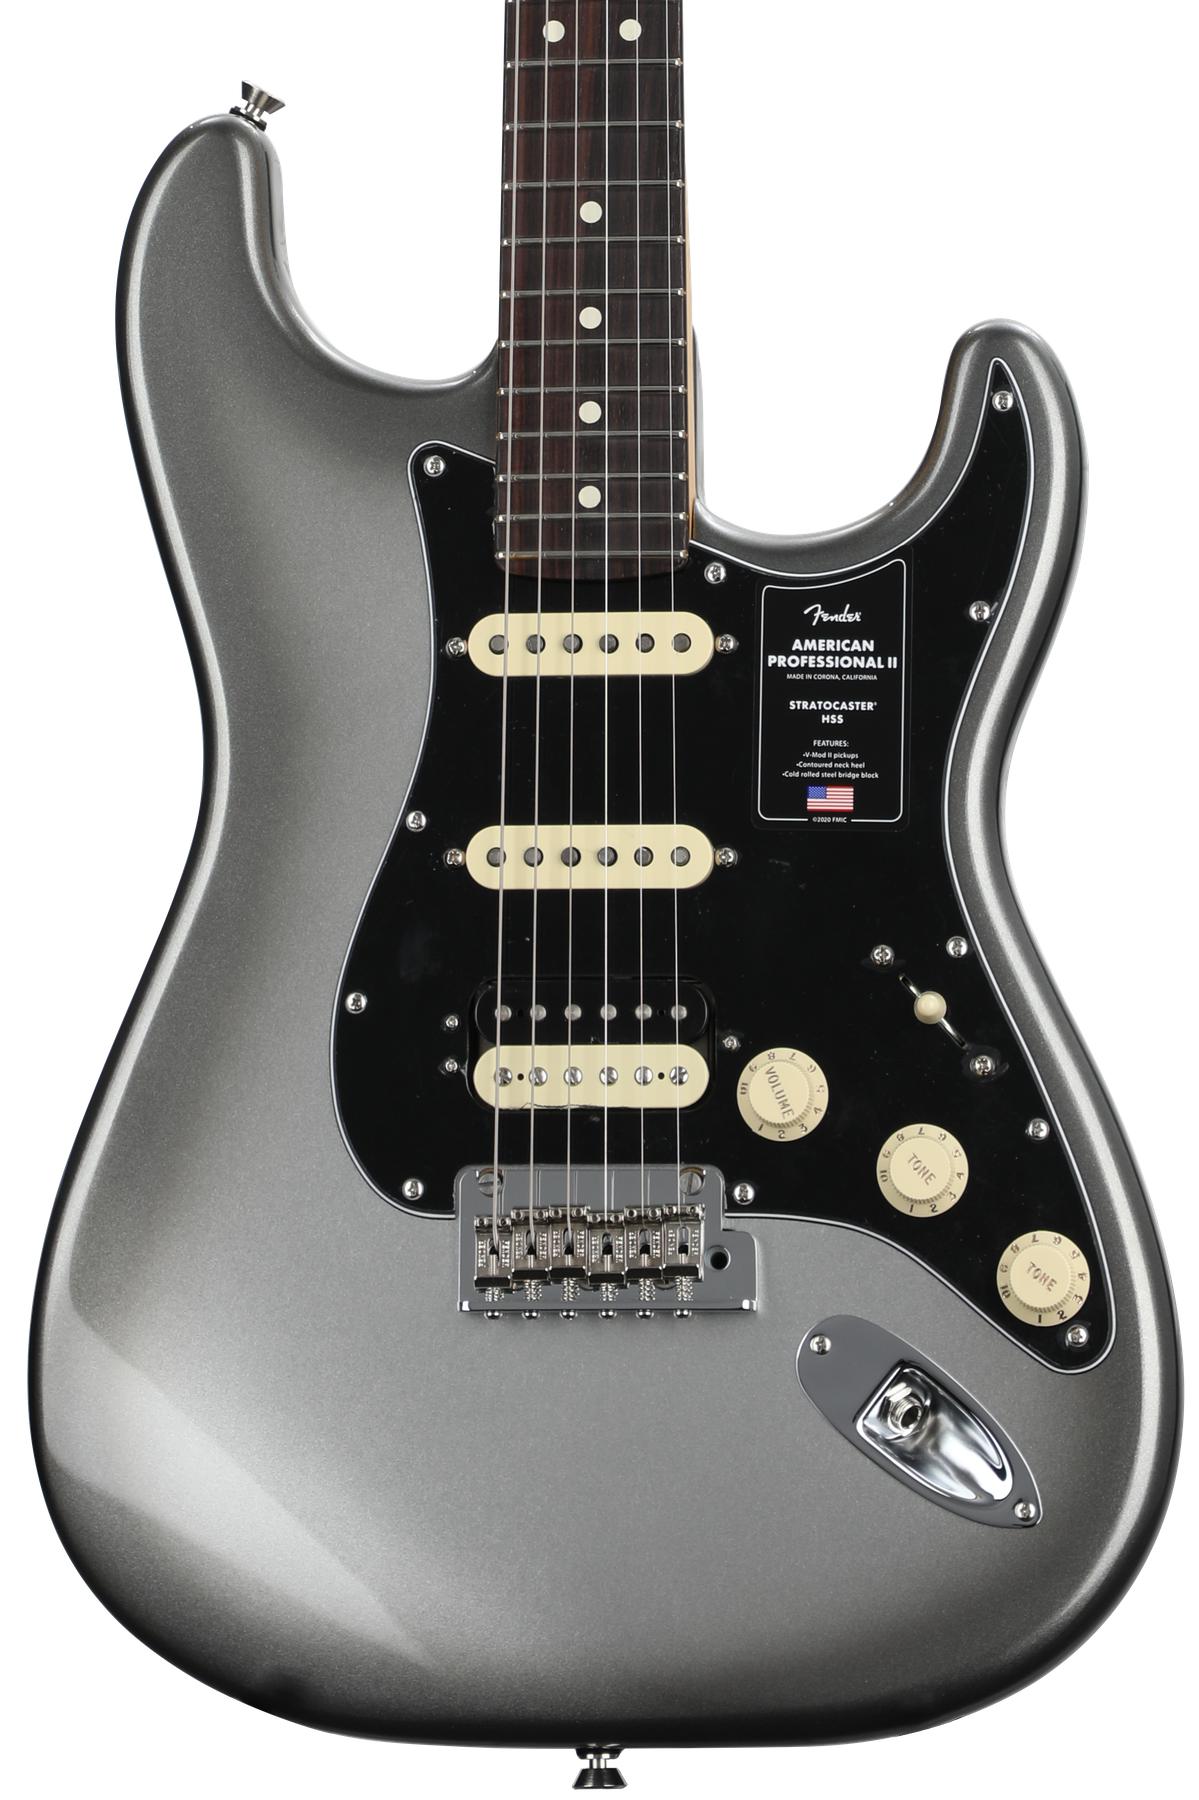 Fender American Professional II Stratocaster HSS - Mercury with Rosewood Fingerboard